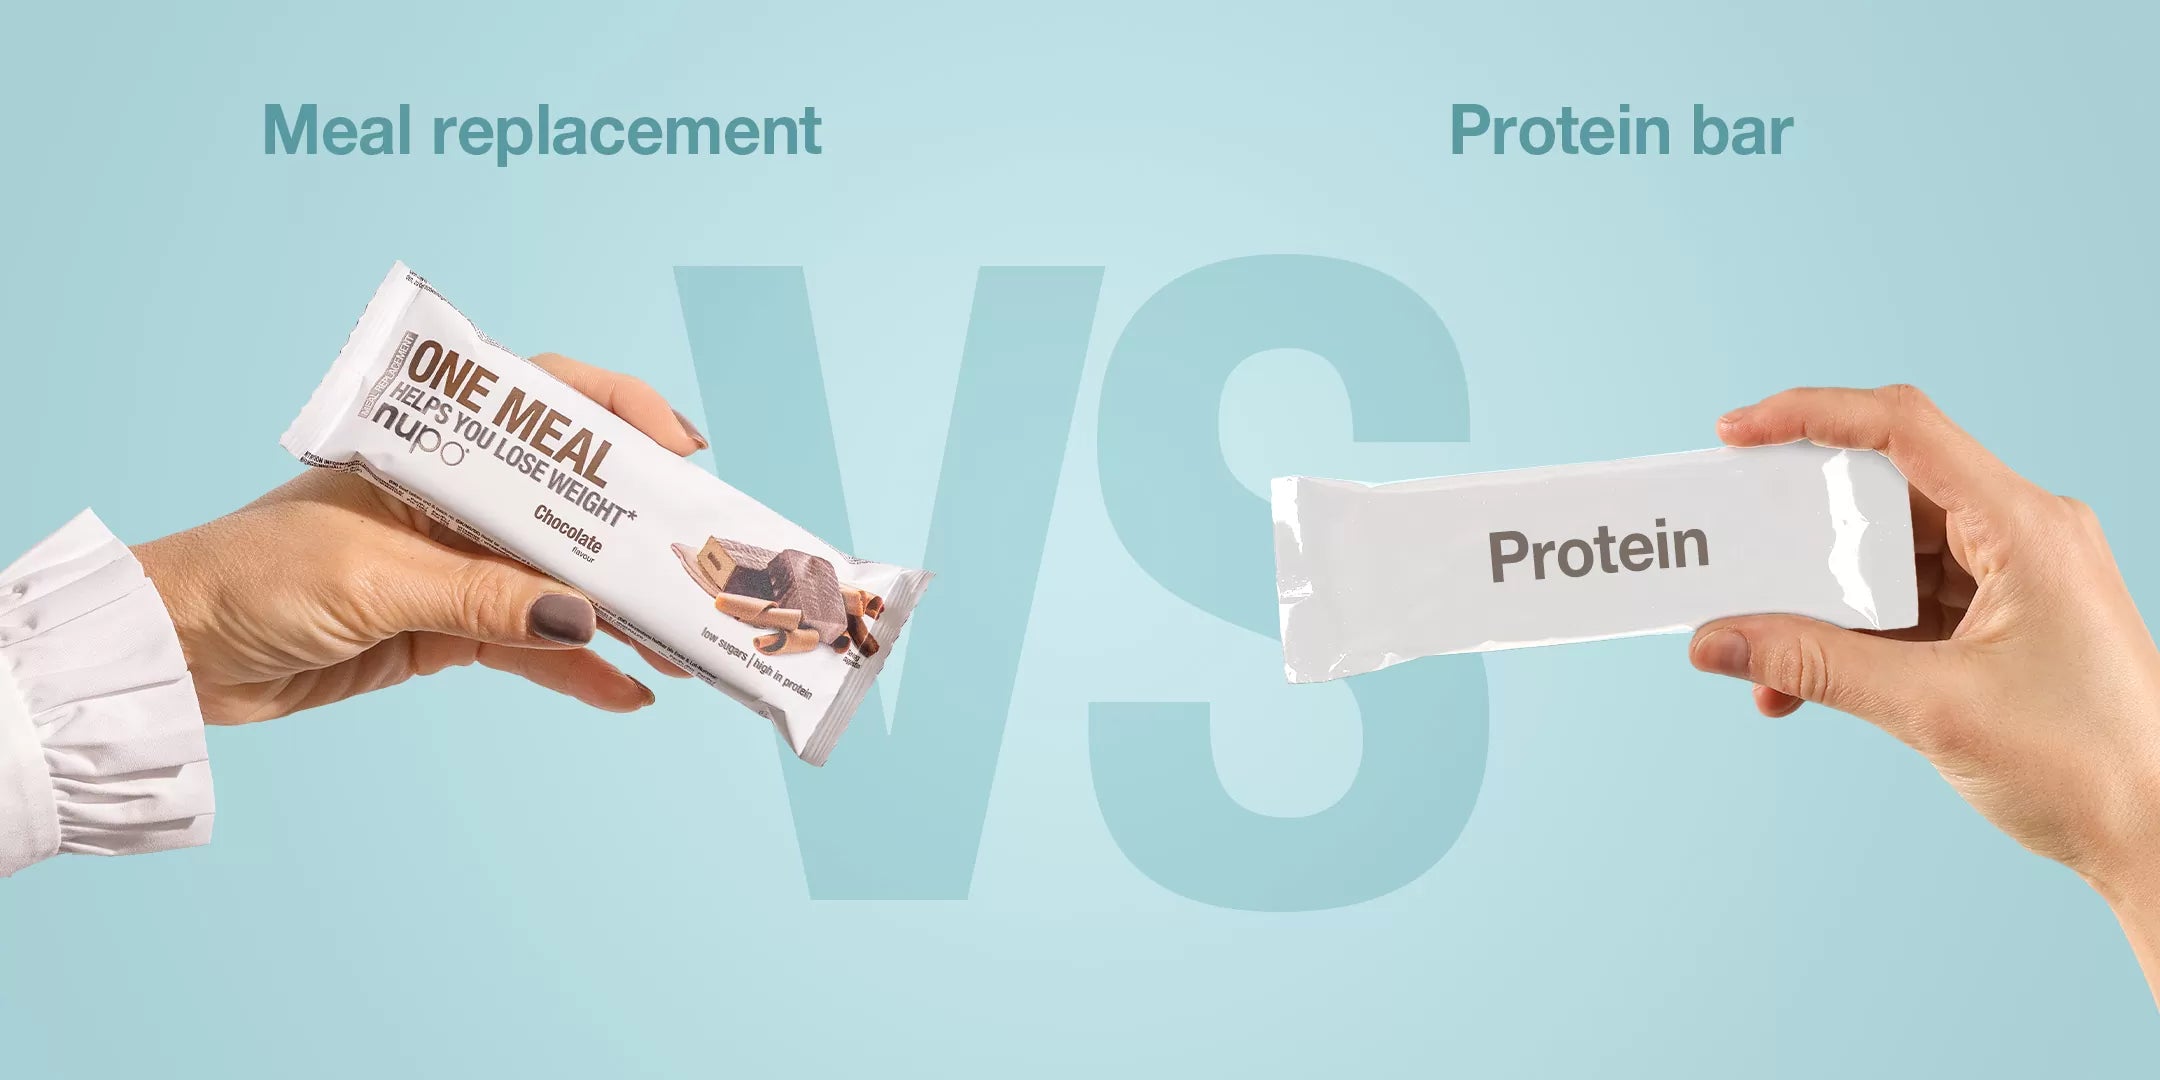 Protein bars vs. meal replacements: Which is better?